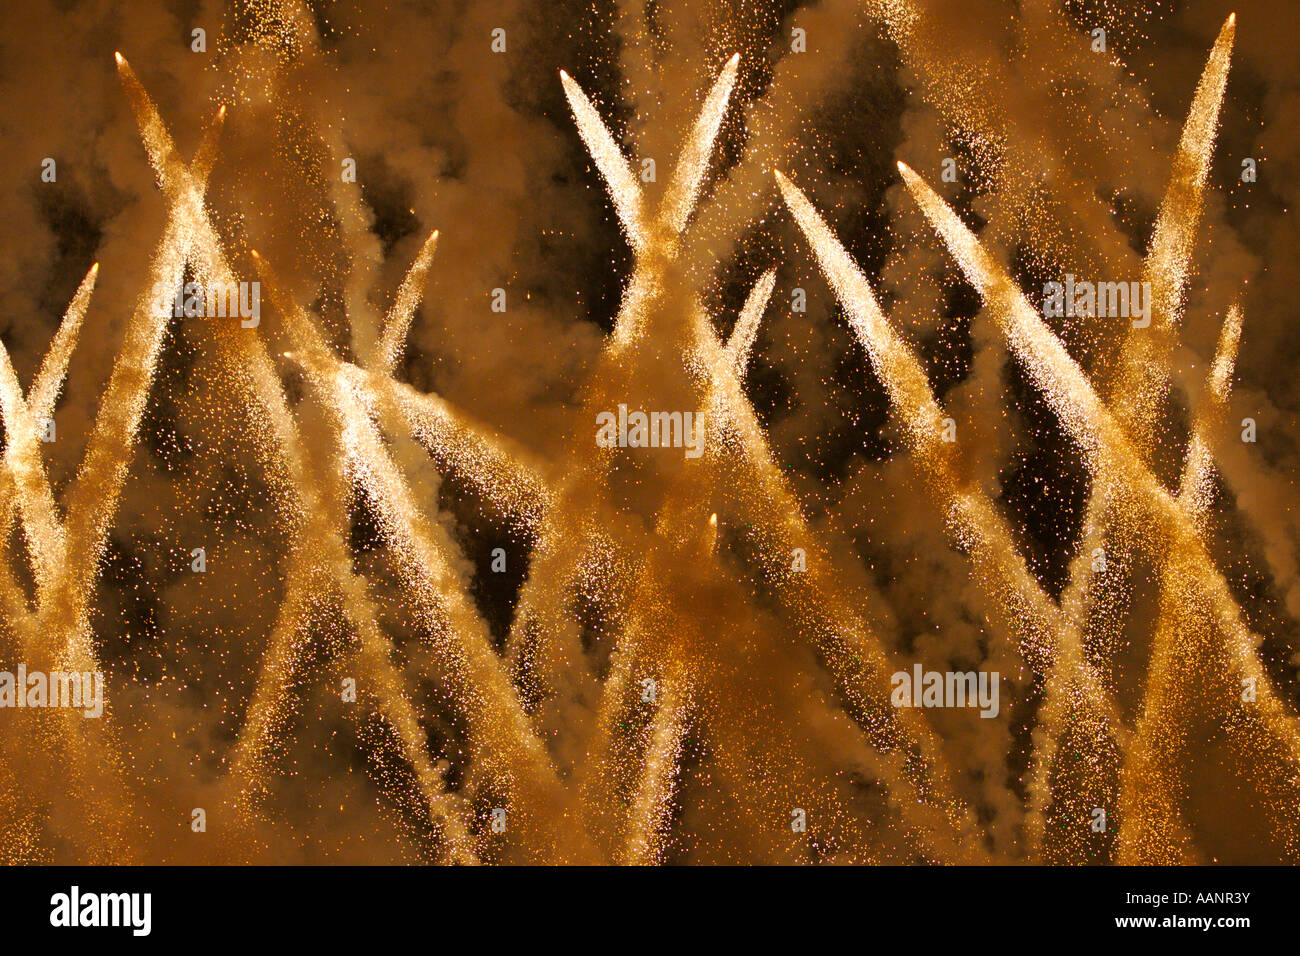 Crisscrossing fireworks during a pyrotechnics show. Stock Photo